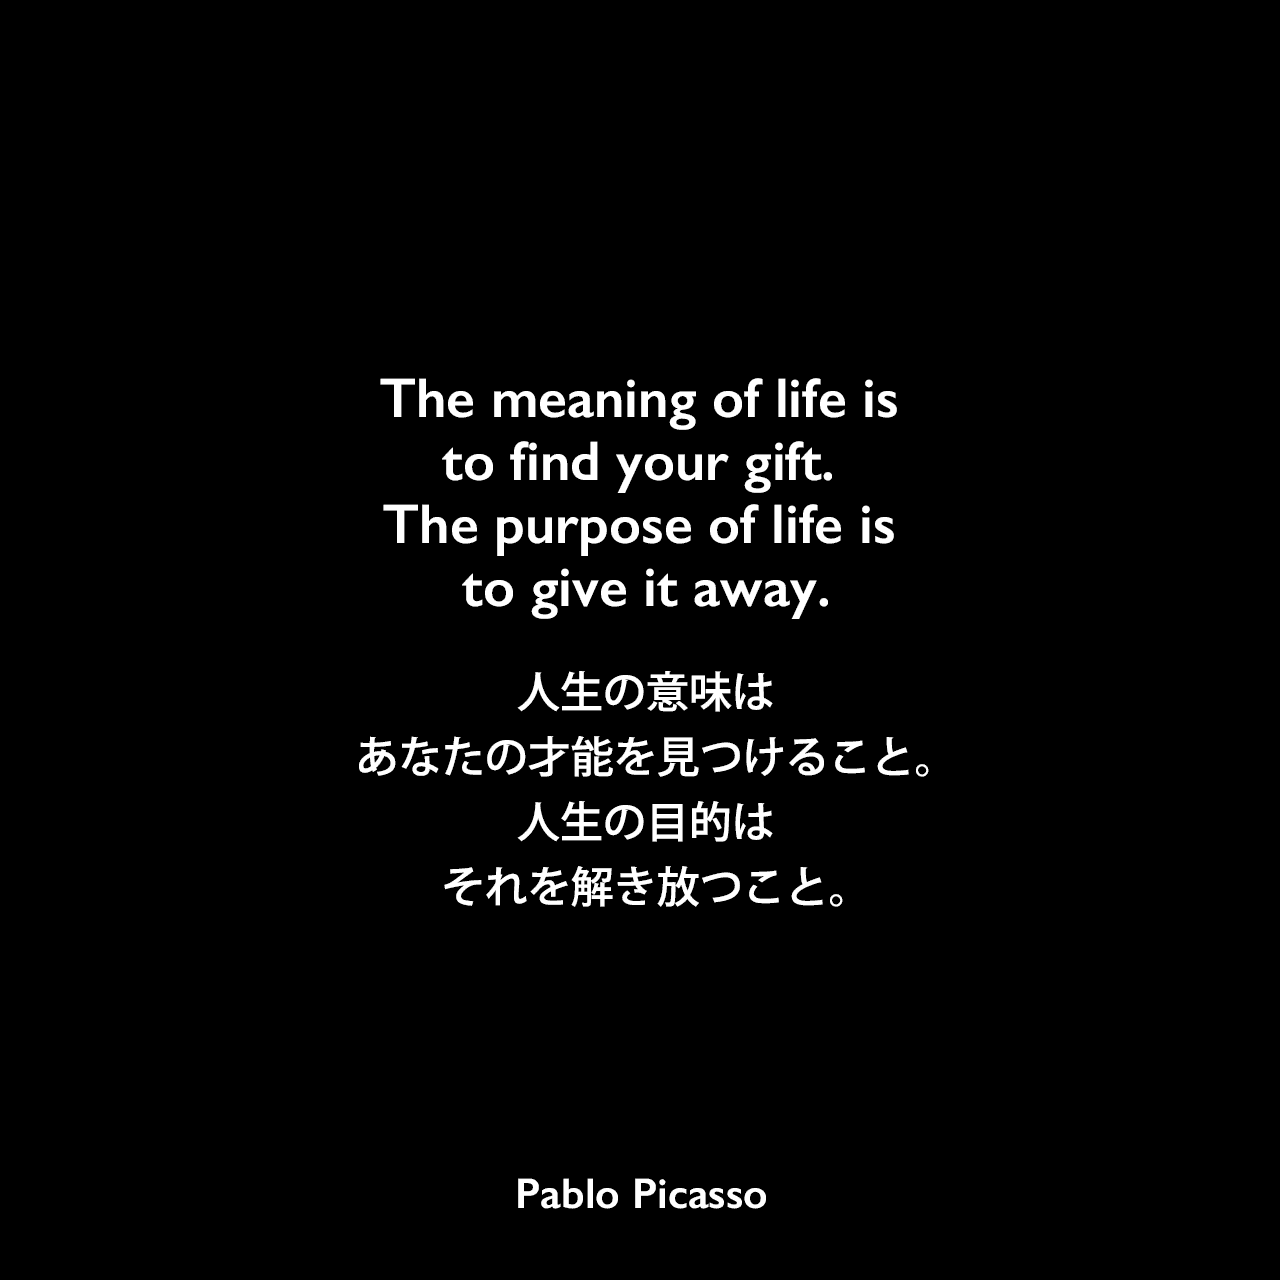 The meaning of life is to find your gift. The purpose of life is to give it away.人生の意味は、あなたの才能を見つけること。人生の目的は、それを解き放つこと。